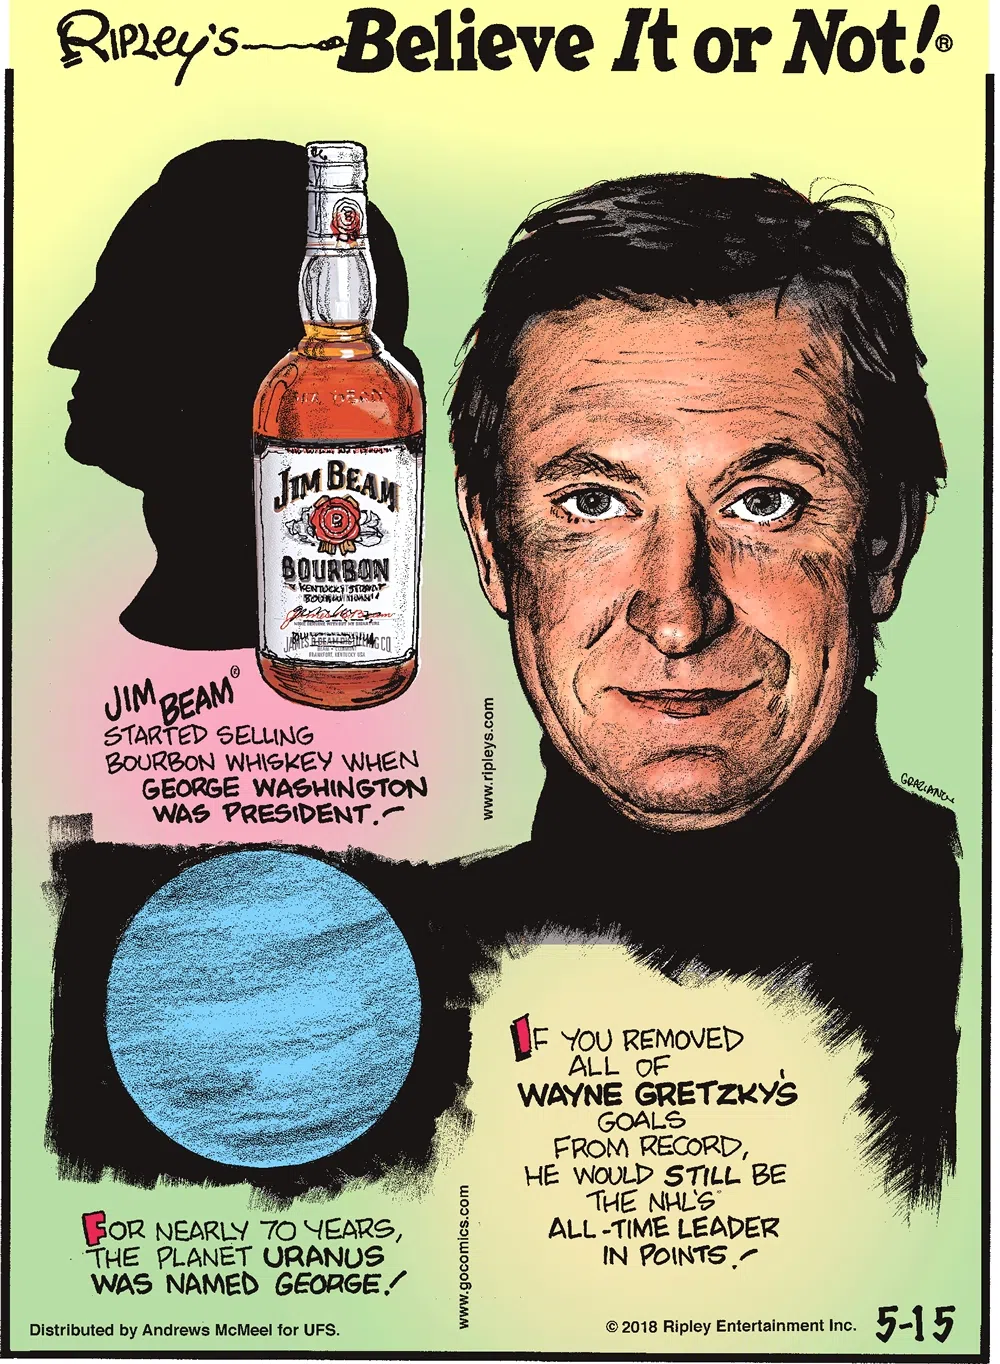 Jim Beam started selling whiskey when George Washington was president!-------------------- For nearly 70 years, the planet Uranus was named George!-------------------- If you removed all of Wayne Gretzky's goals from record, he would still be the NHL's all-time leader in points!